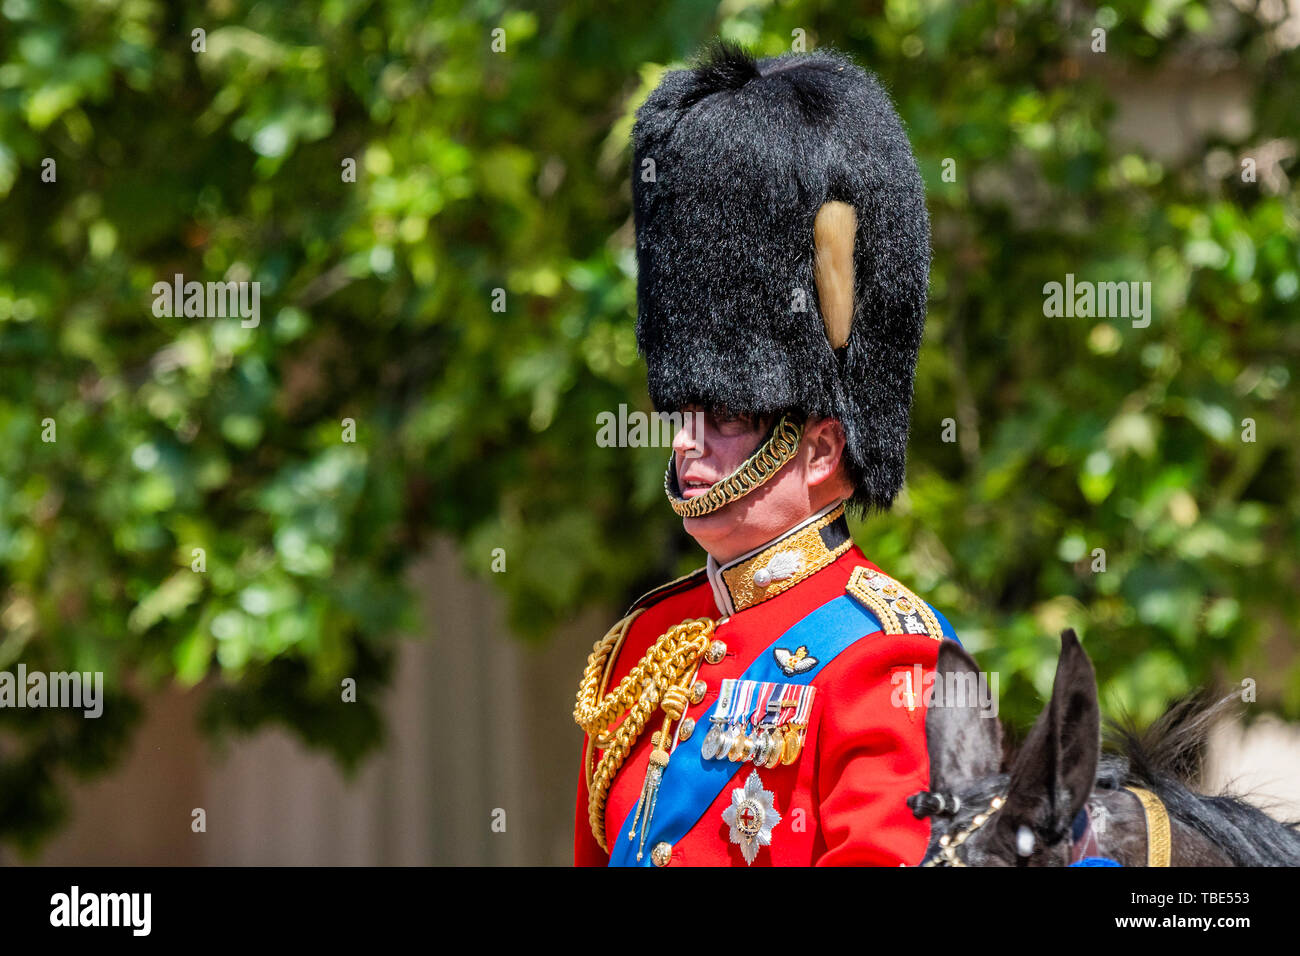 London, UK. 1st June 2019. Prince Andrew returns down the Mall - His Royal Highness the Duke of York reviews the final rehearsal for the Trooping the Colour on Horseguards Parade and the Mall. Credit: Guy Bell/Alamy Live News Credit: Guy Bell/Alamy Live News Stock Photo